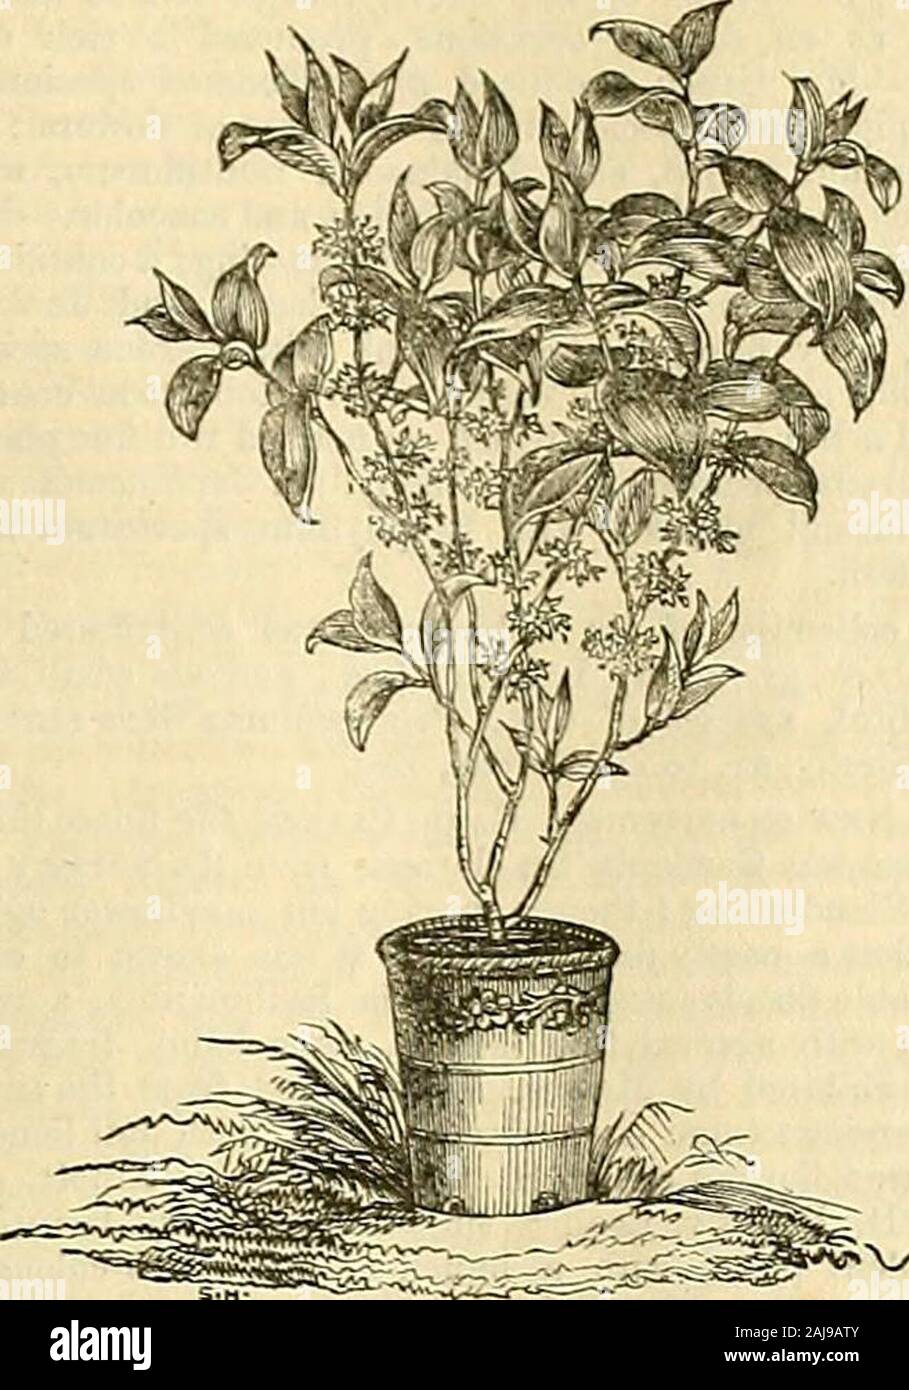 The Gardeners' Chronicle and Agricultural Gazette . r than those to which the first prize wasawarded, but being overgrown, and to some extent whatcultivators call leggy, they w-ere not considered sofine as Mr. Bamess compact specimens. The collectionilso contained too many soft-wooded plants. Amongthem, however, were several specimens of great excel-lence, especially Pavetta cafira, eight feet in height, andibnr feet through, formmg a rich cone of verdure,prettily covered with w-hite flowers, but not quite suffi-:iently in bloom. Clerodendrum Koempferl was alsorery fine, having a spike of flow Stock Photo